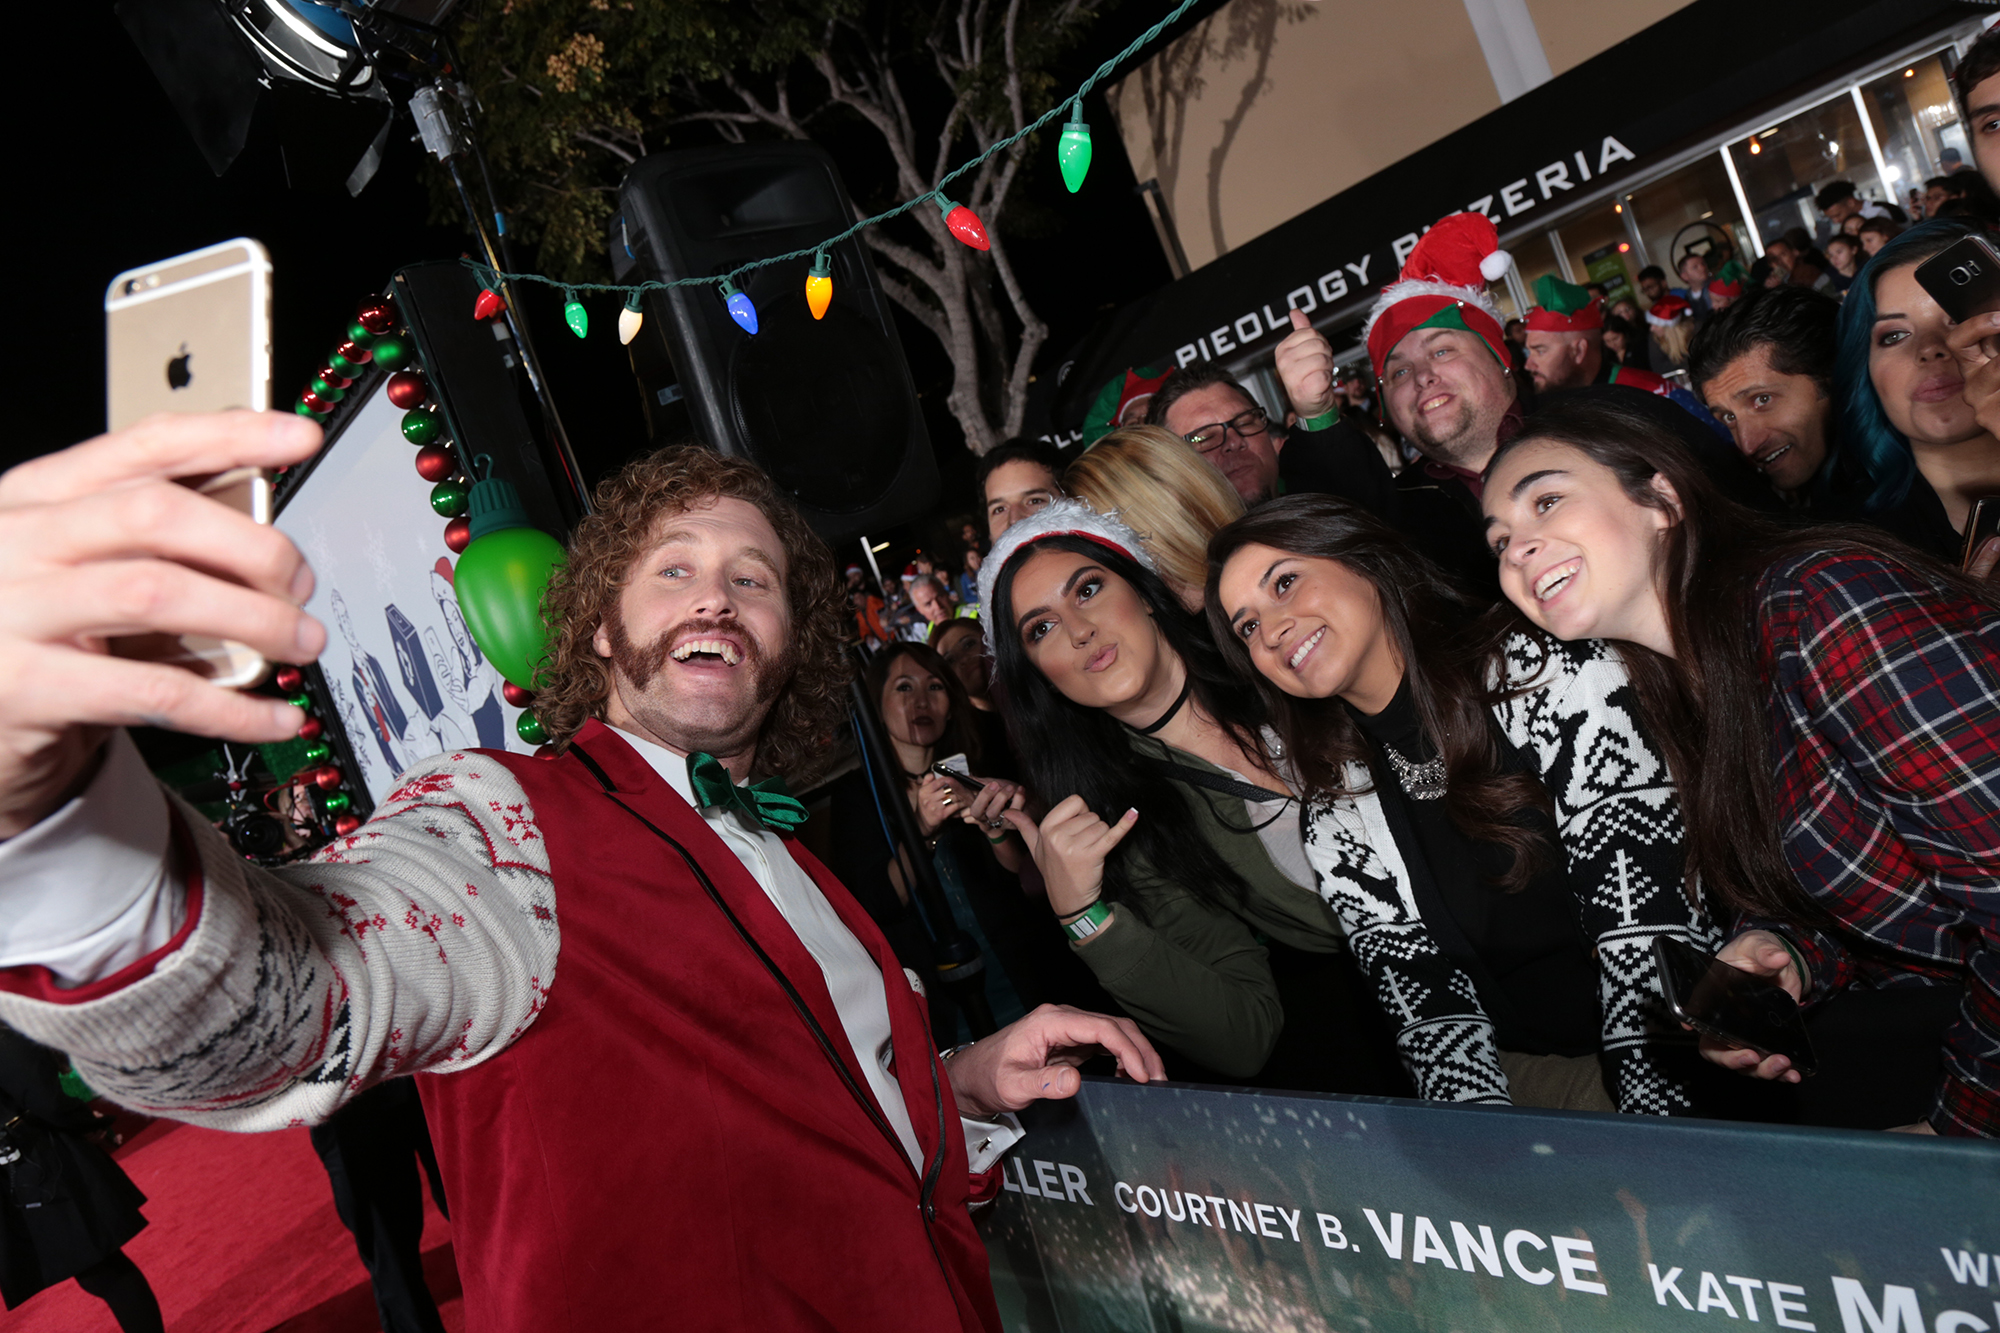 T.J. Miller takes a selfie as Paramount Pictures presents the Los Angeles premiere of "Office Christmas Party" at the Regency Village Theater in Los Angeles, CA on Wednesday, December 7, 2016  (Photo: Alex J. Berliner / ABImages)